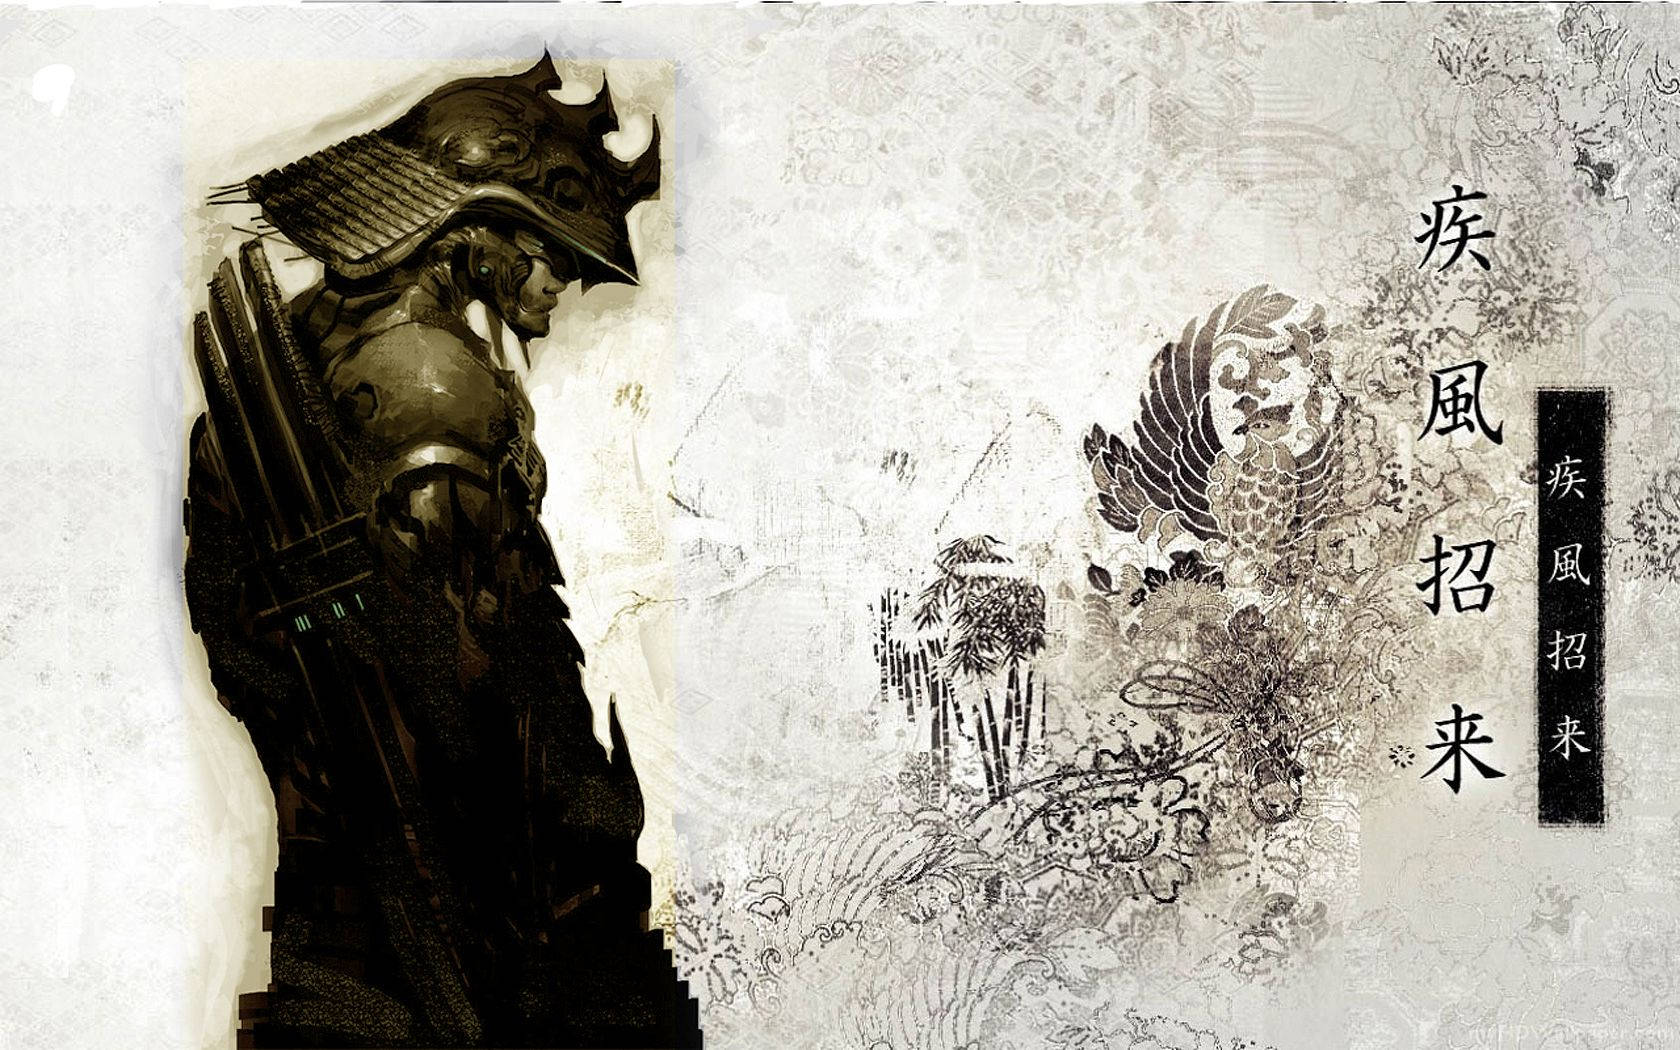 A traditional Samurai warrior protecting the Japanese countryside Wallpaper